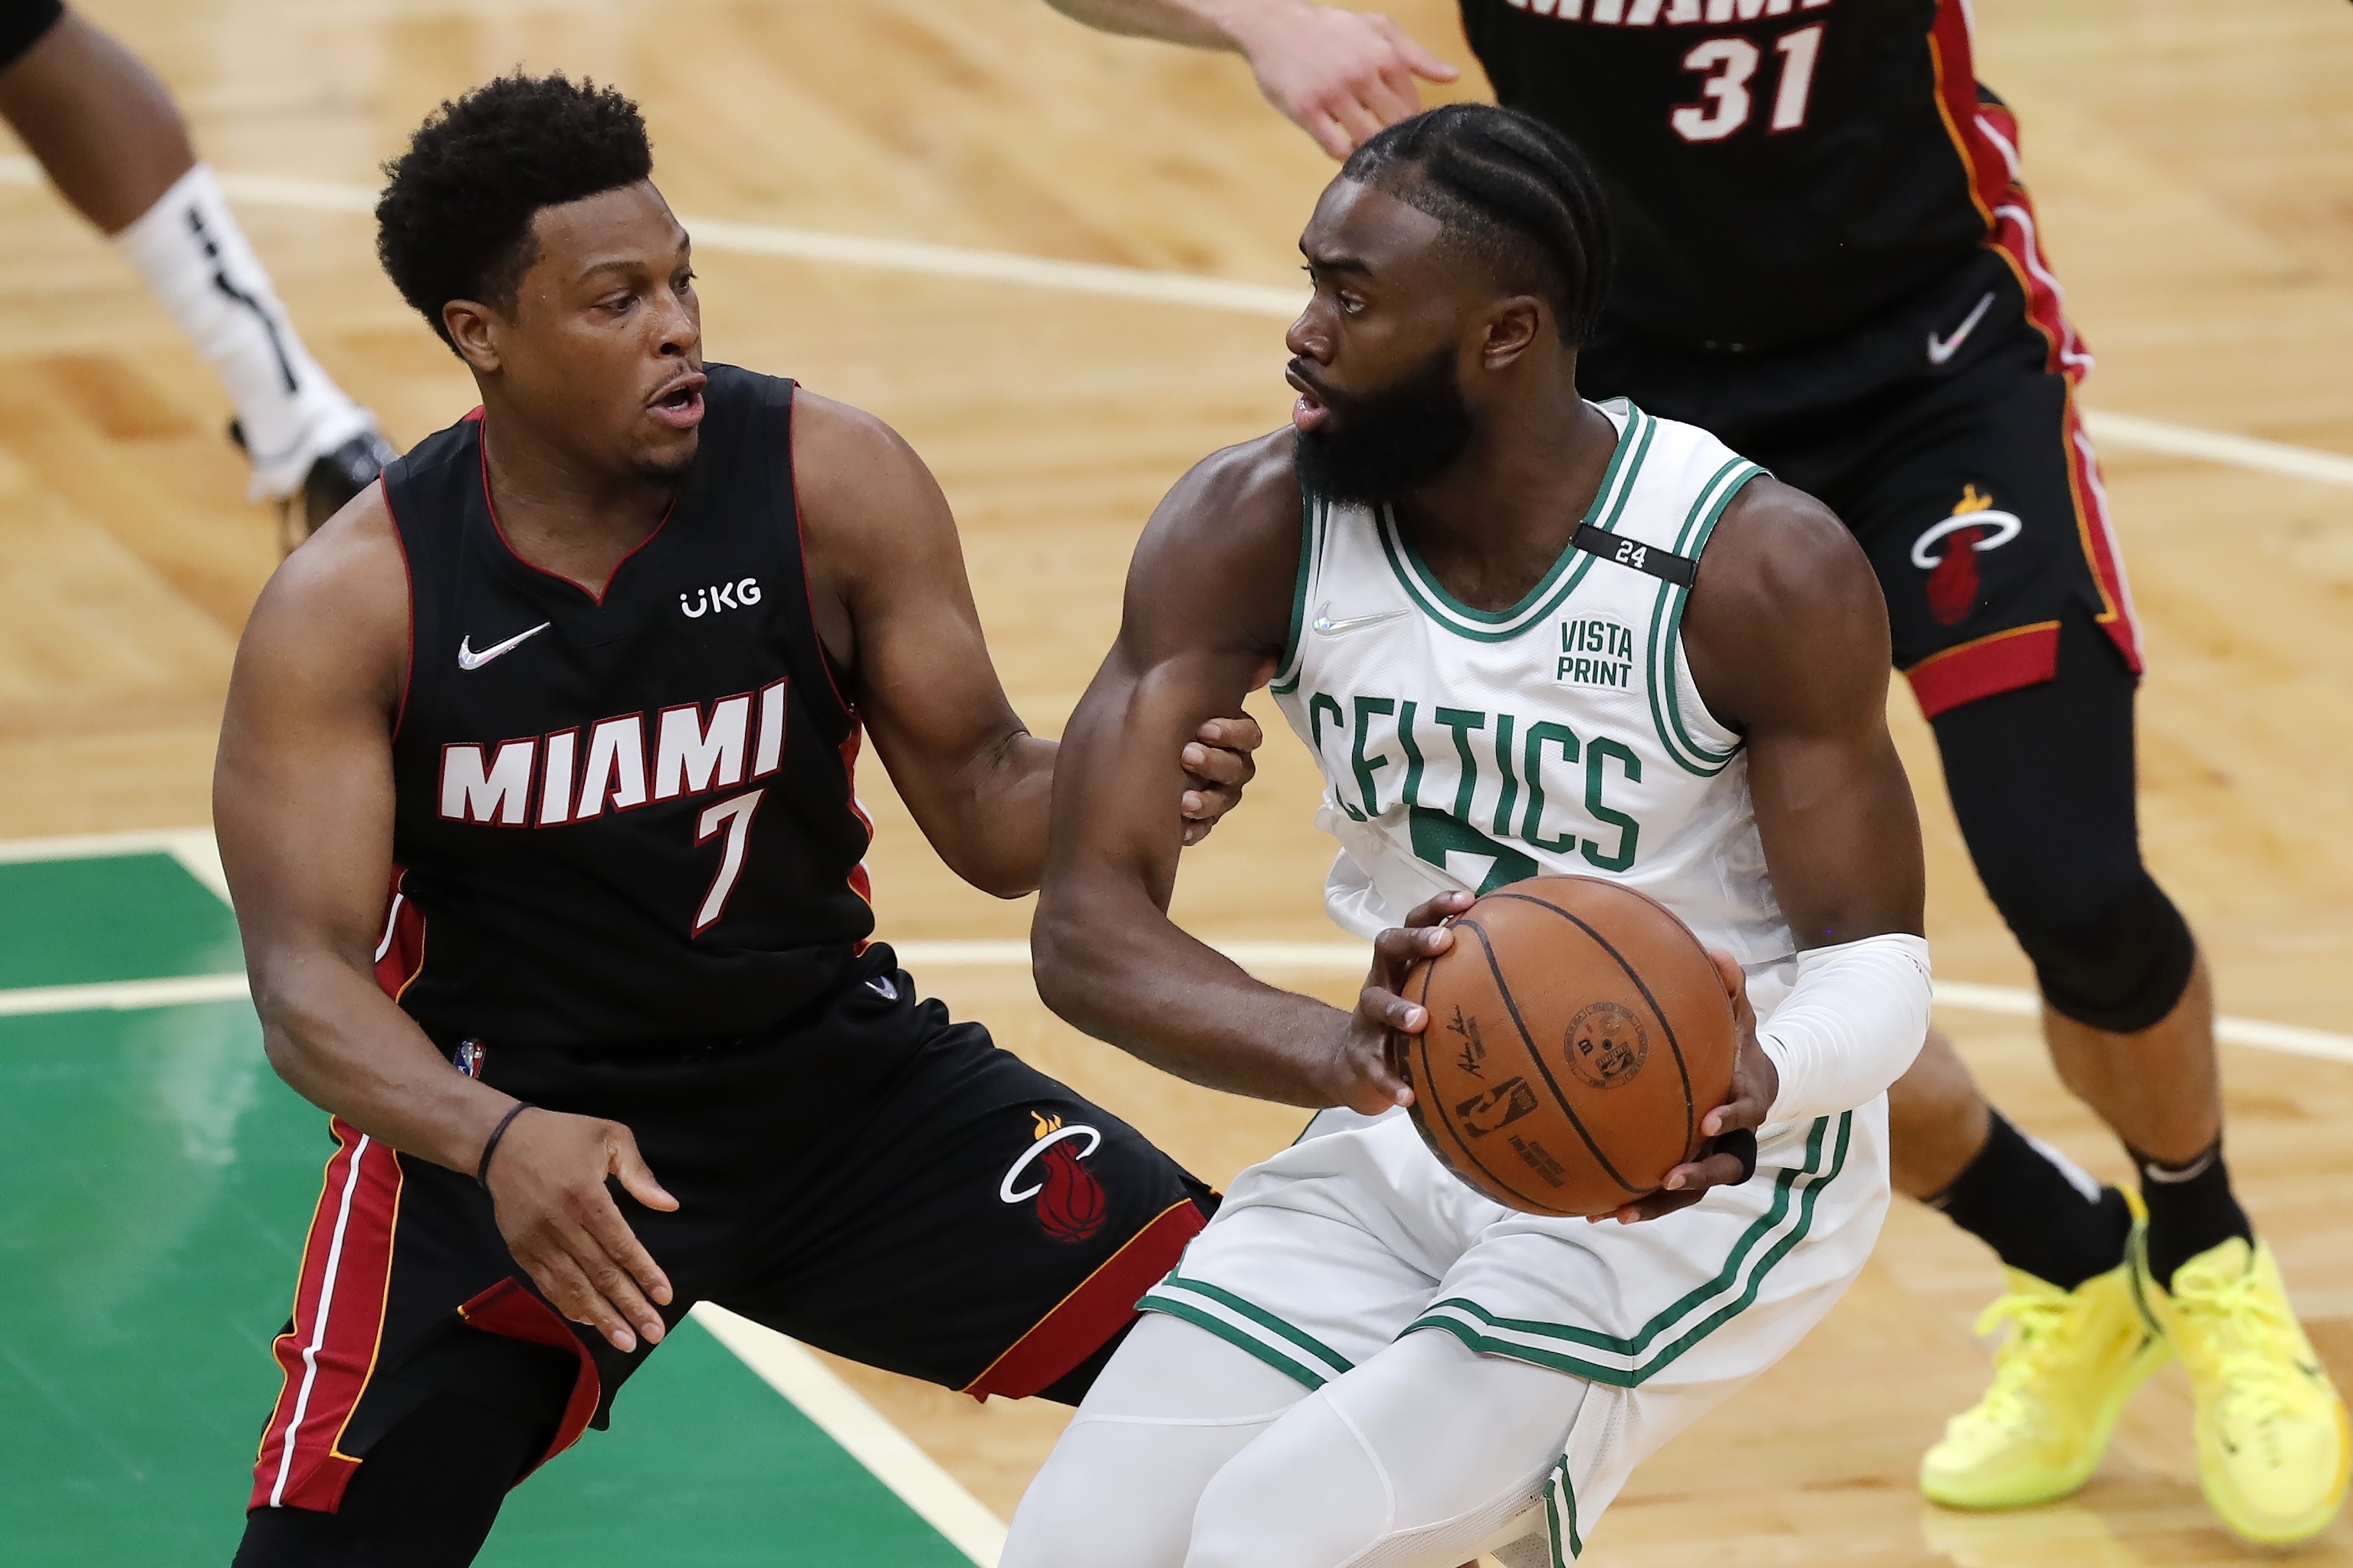 Celtics, Heat walk off court during warmups, decide to play game